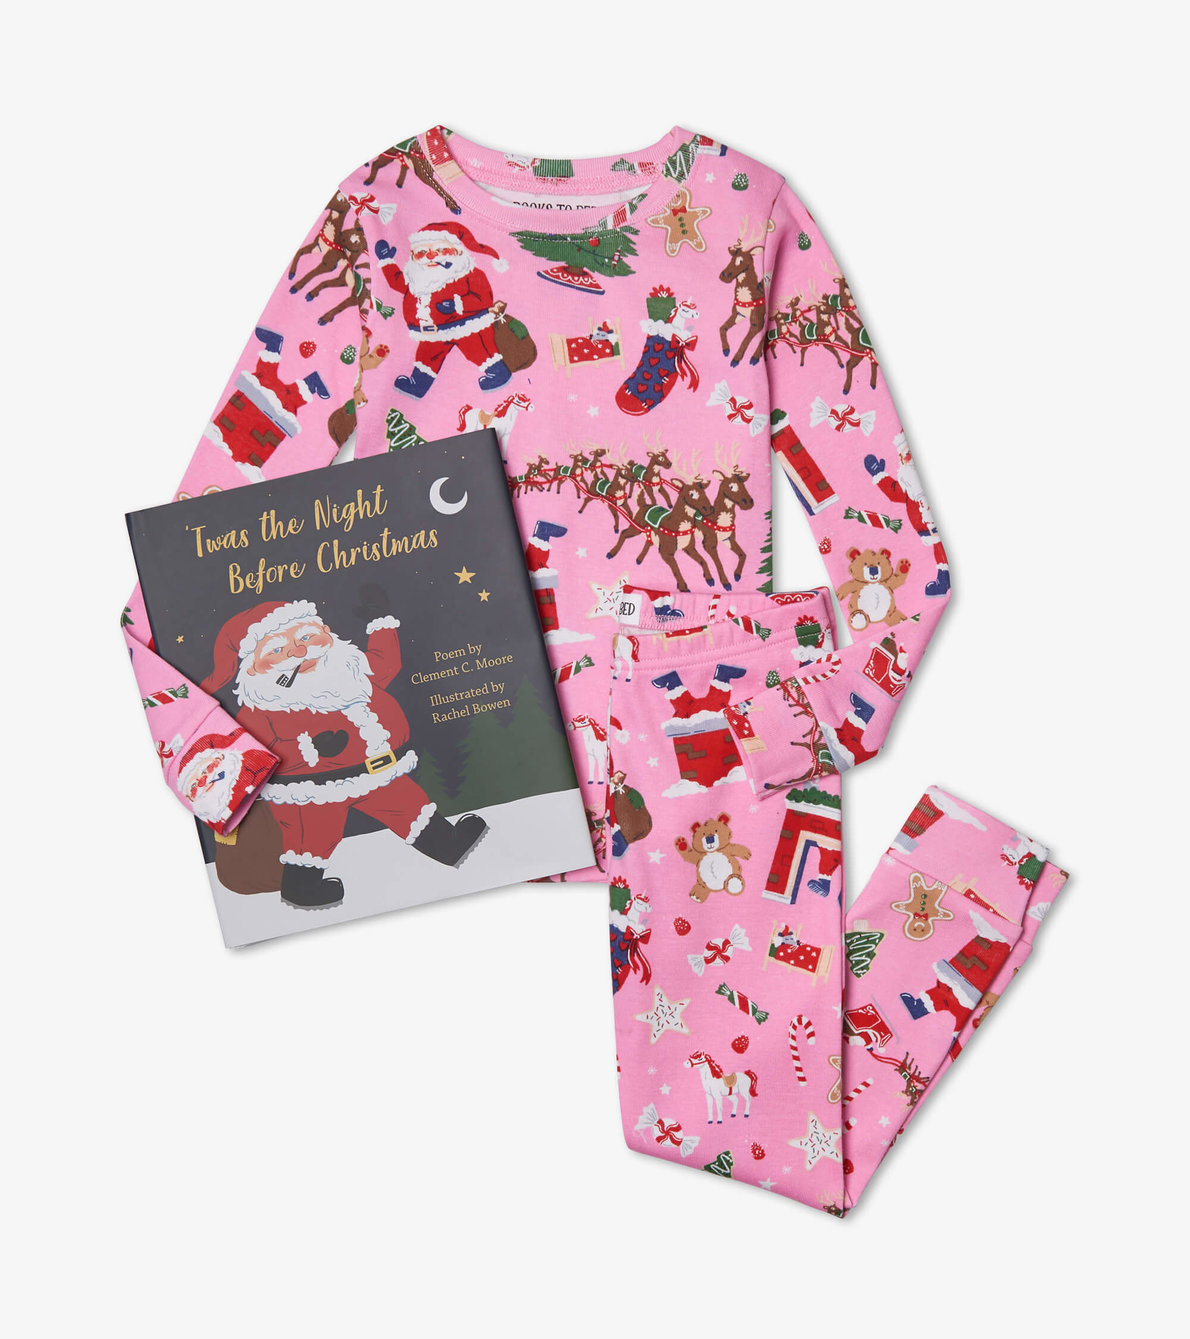 View larger image of Twas the Night Before Christmas Pink Book and Pajama Set